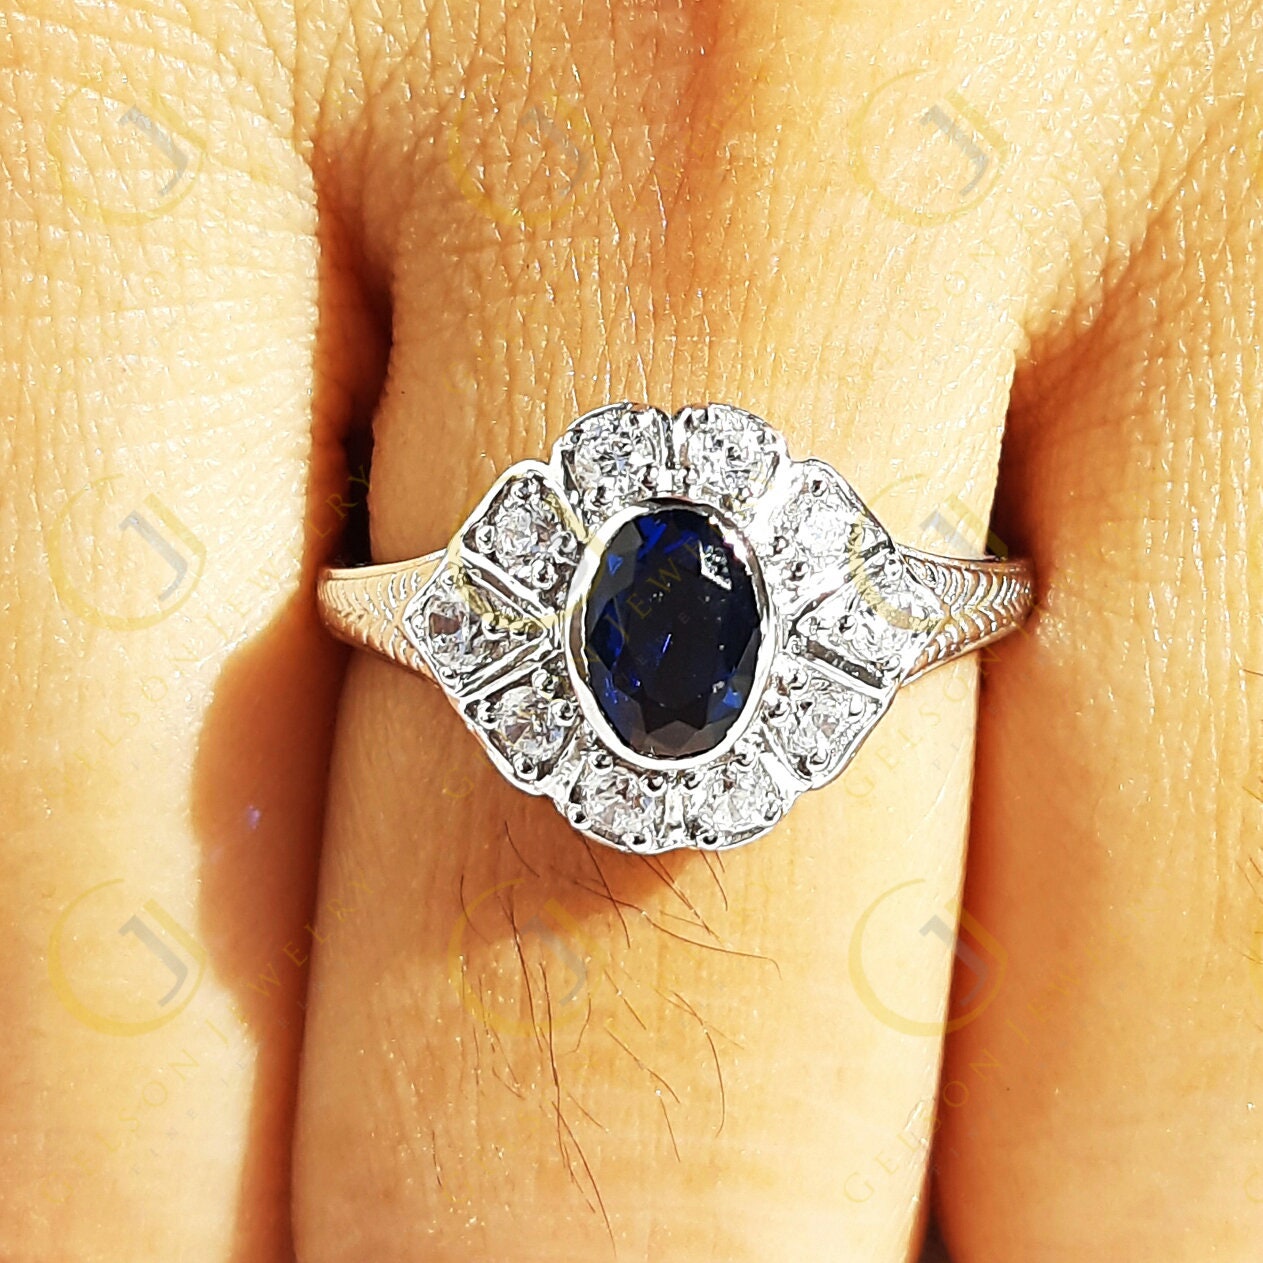 Art deco Engagement Ring, Oval Blue Sapphire Simulated Diamond, Vintage wedding ring, Sterling Silver, Promise ring, Gift for Her